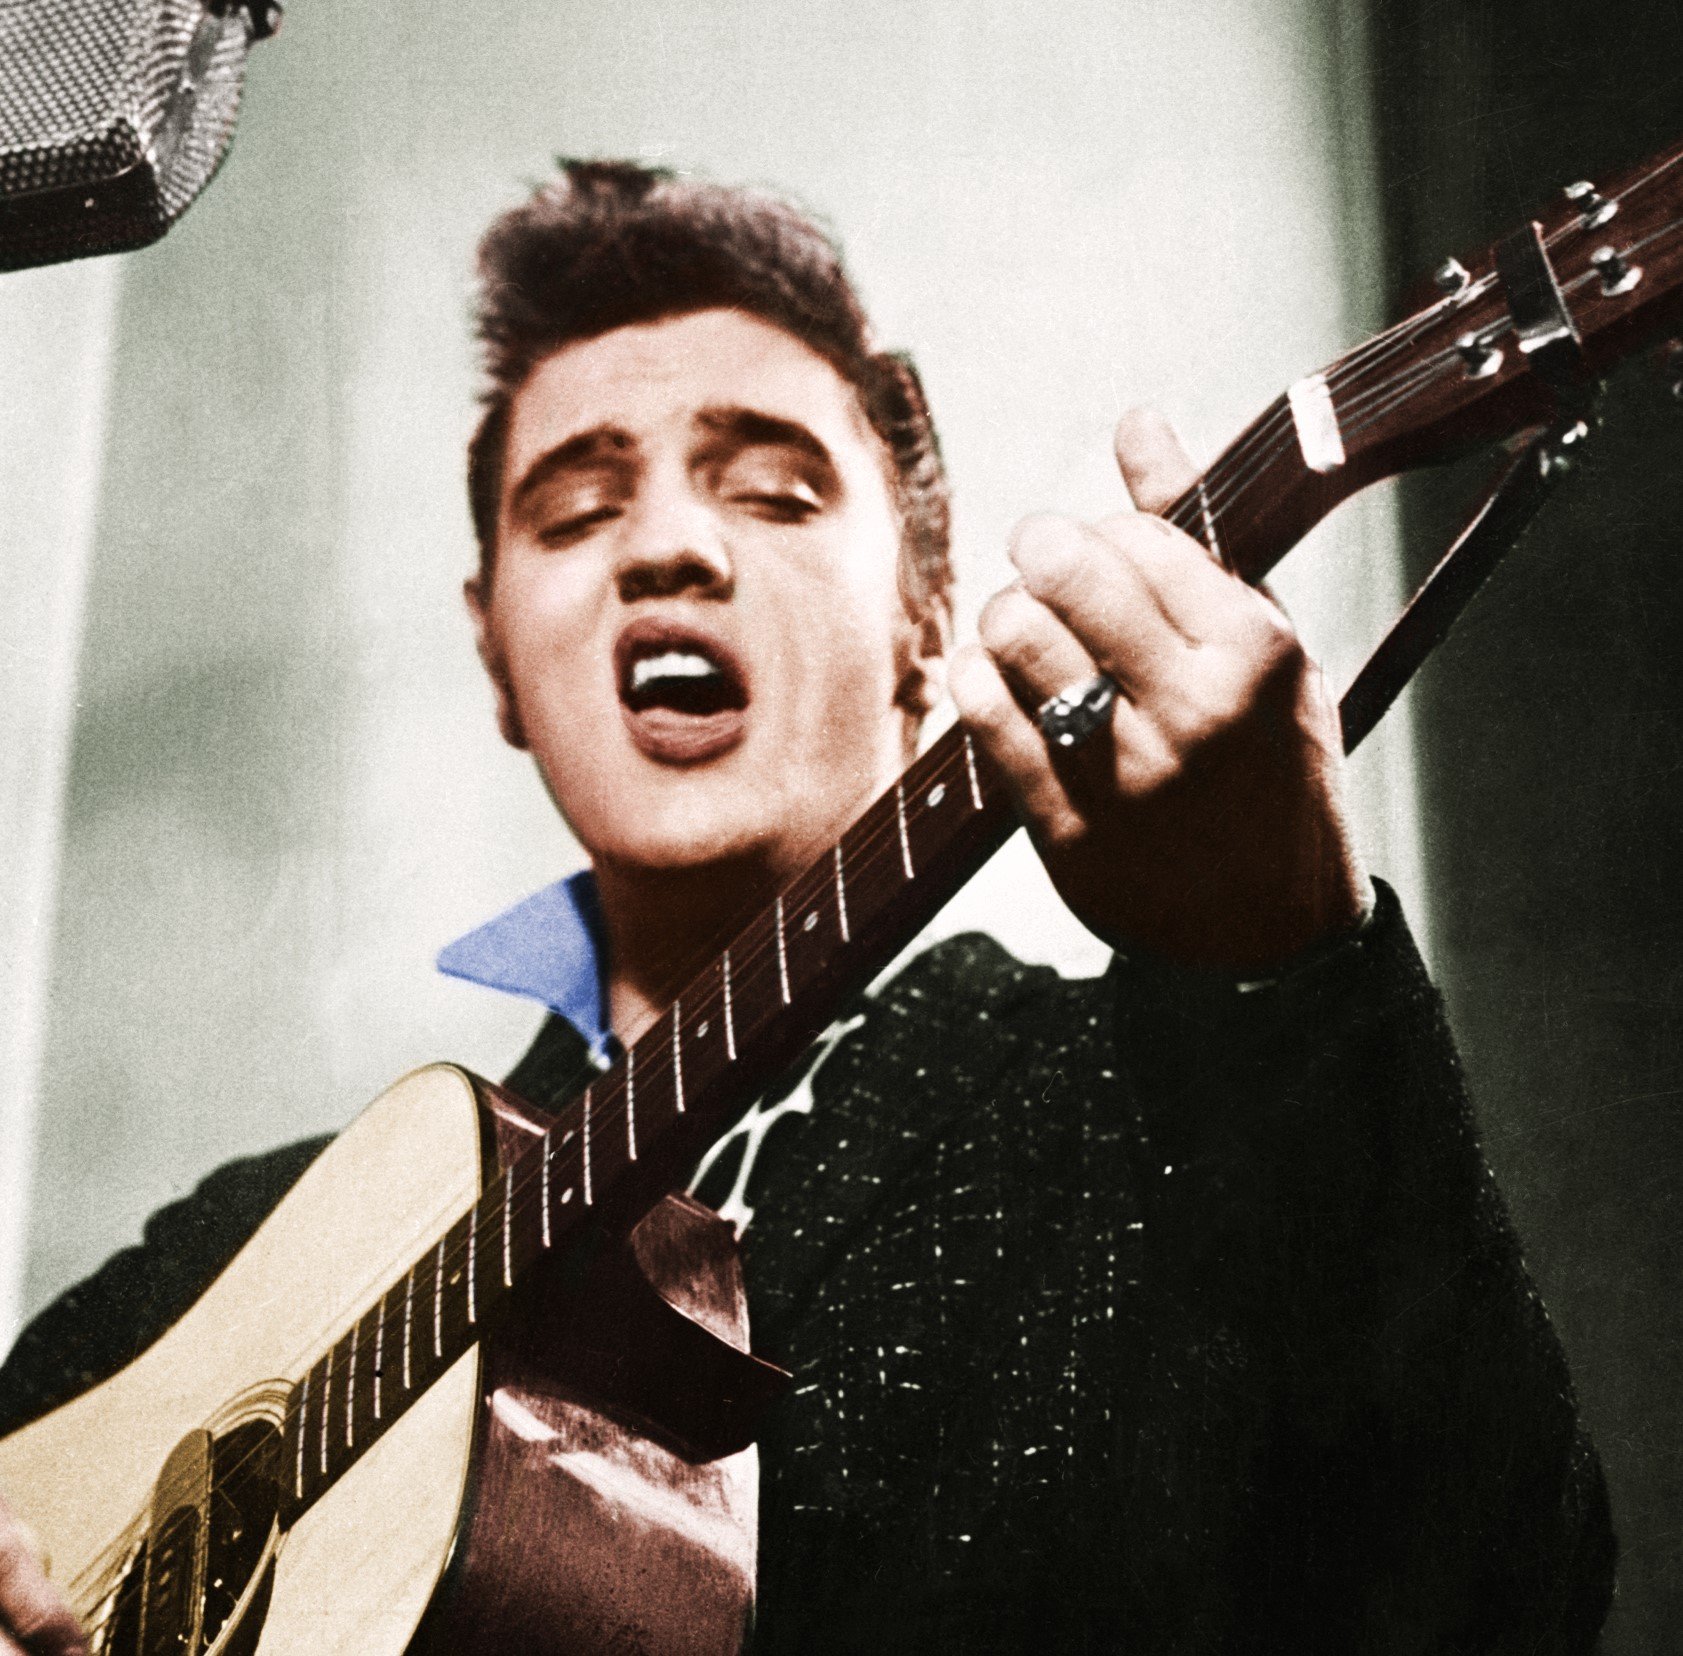 Elvis Presley singing and playing a guitar